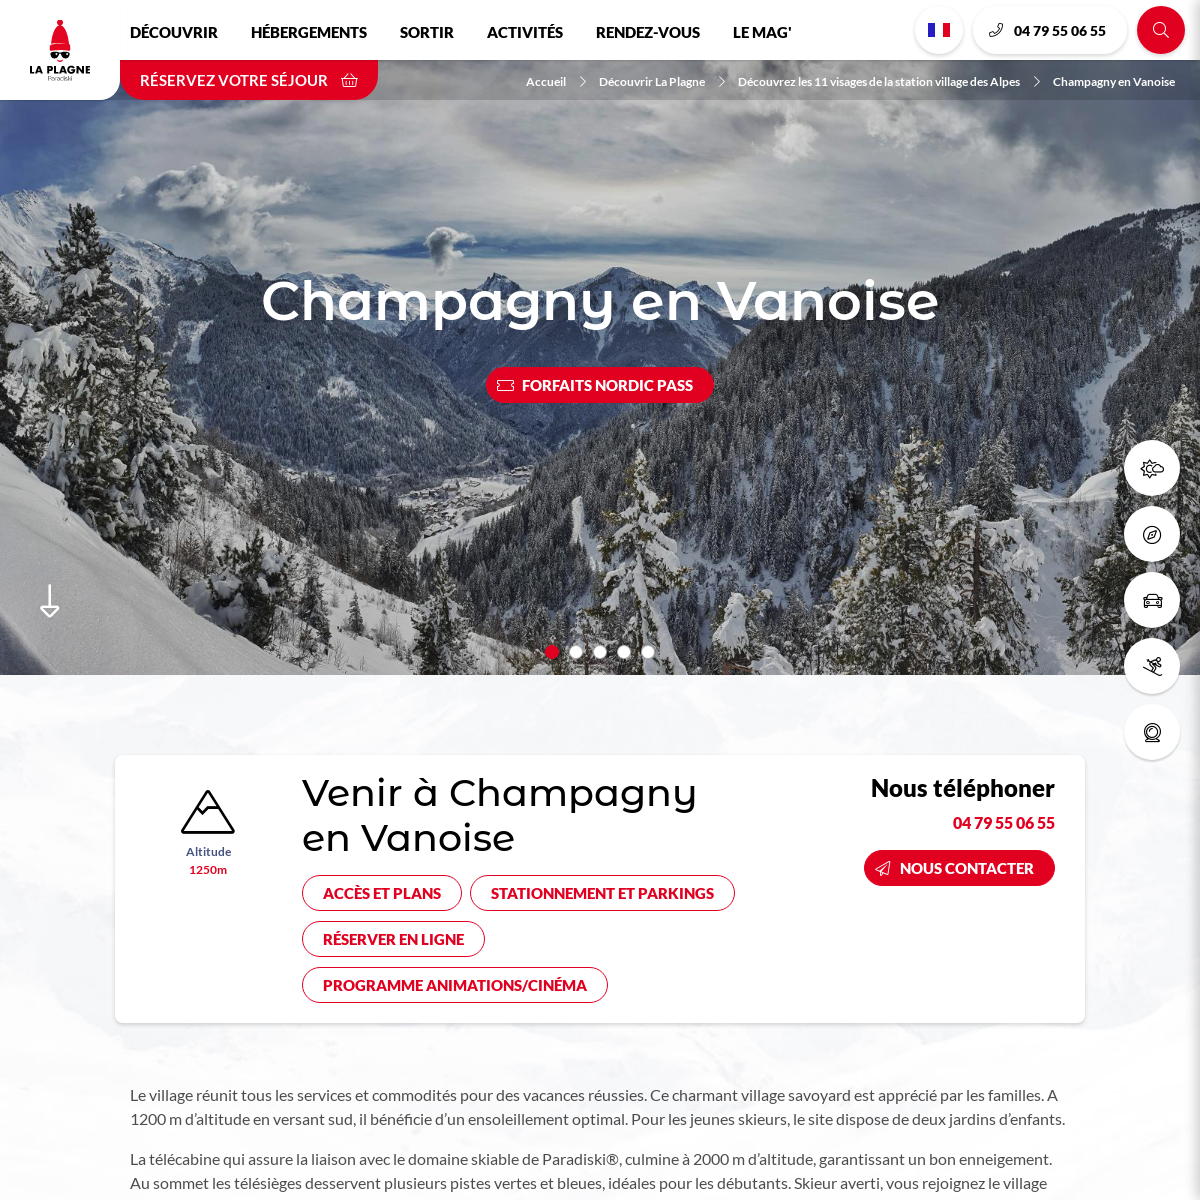 A complete backup of champagny.com